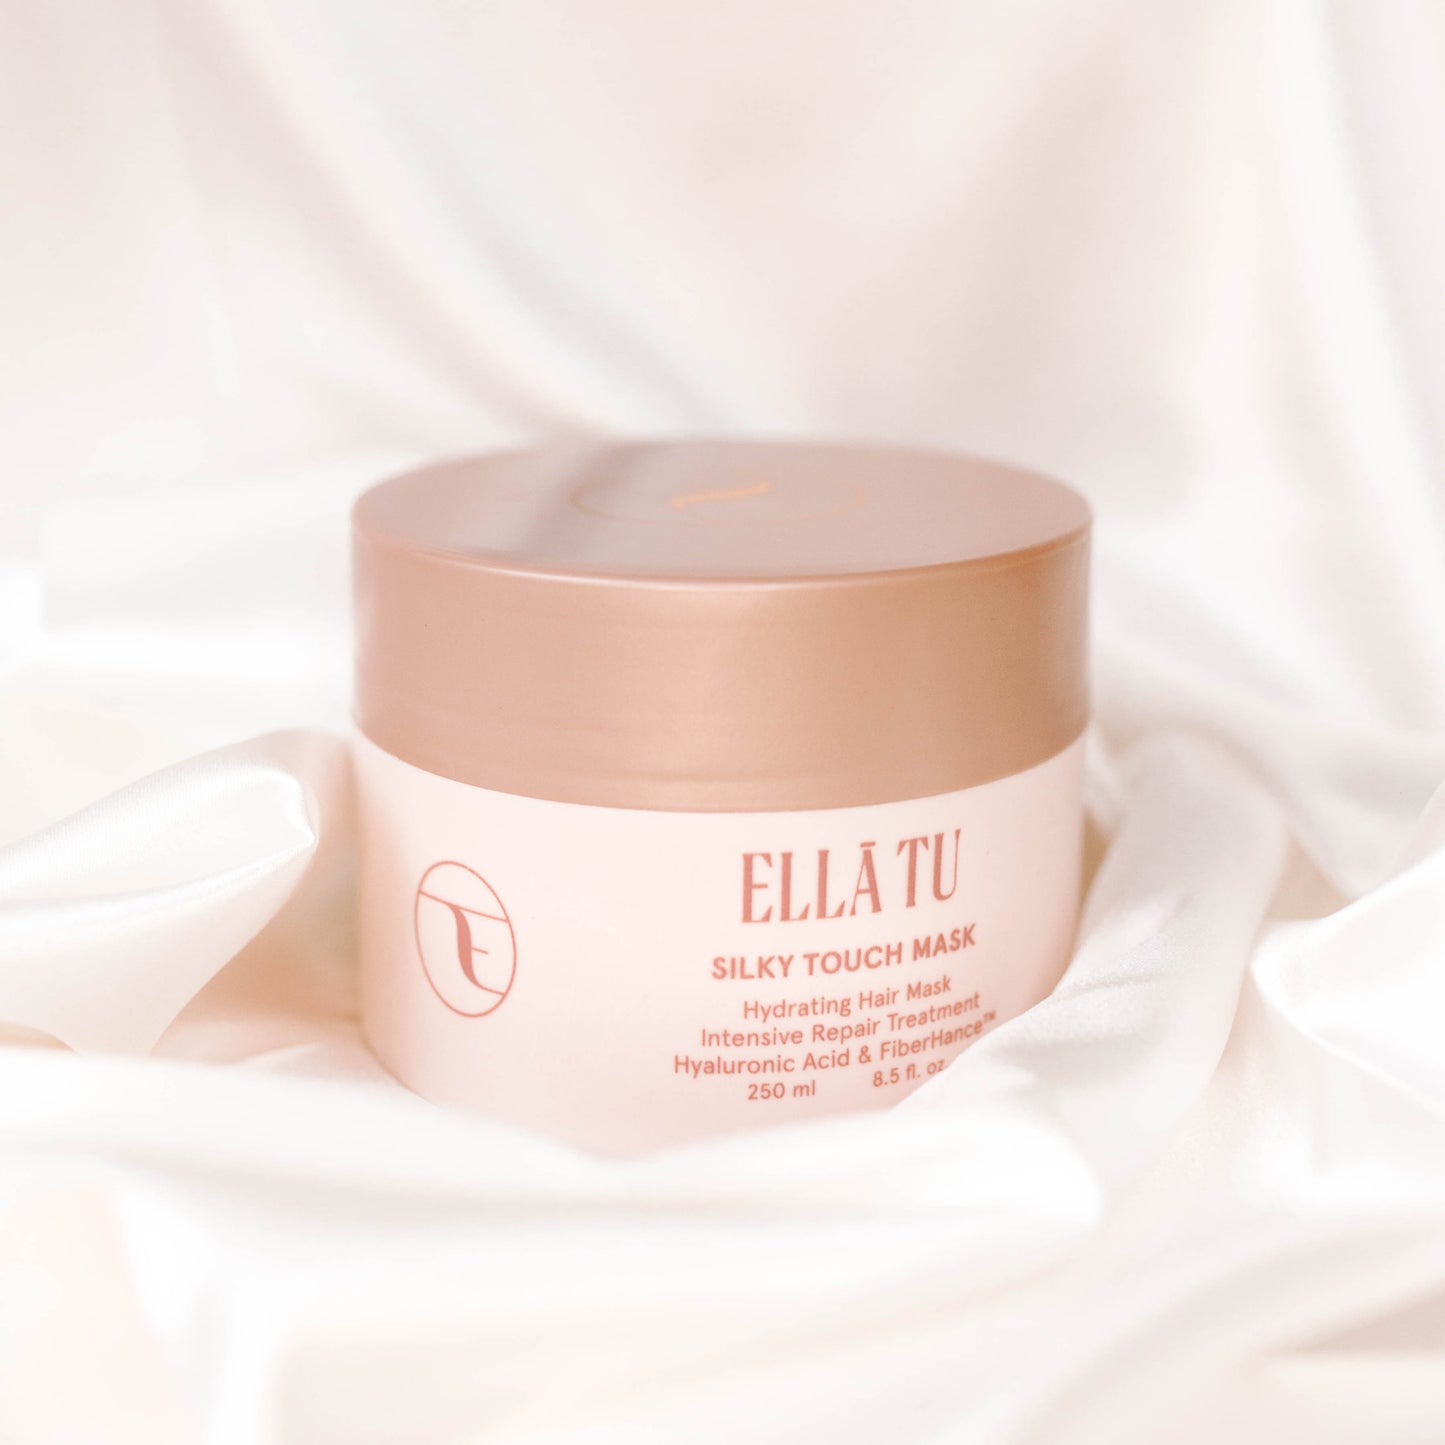 Deeply condition and hydrate your hair with the amazing Ellatu Silky Touch Hair Mask, enriched with hydrating, nourishing and bond building ingredients such as Vitamin E, Hyaluronic Acid and Fiberhance. 